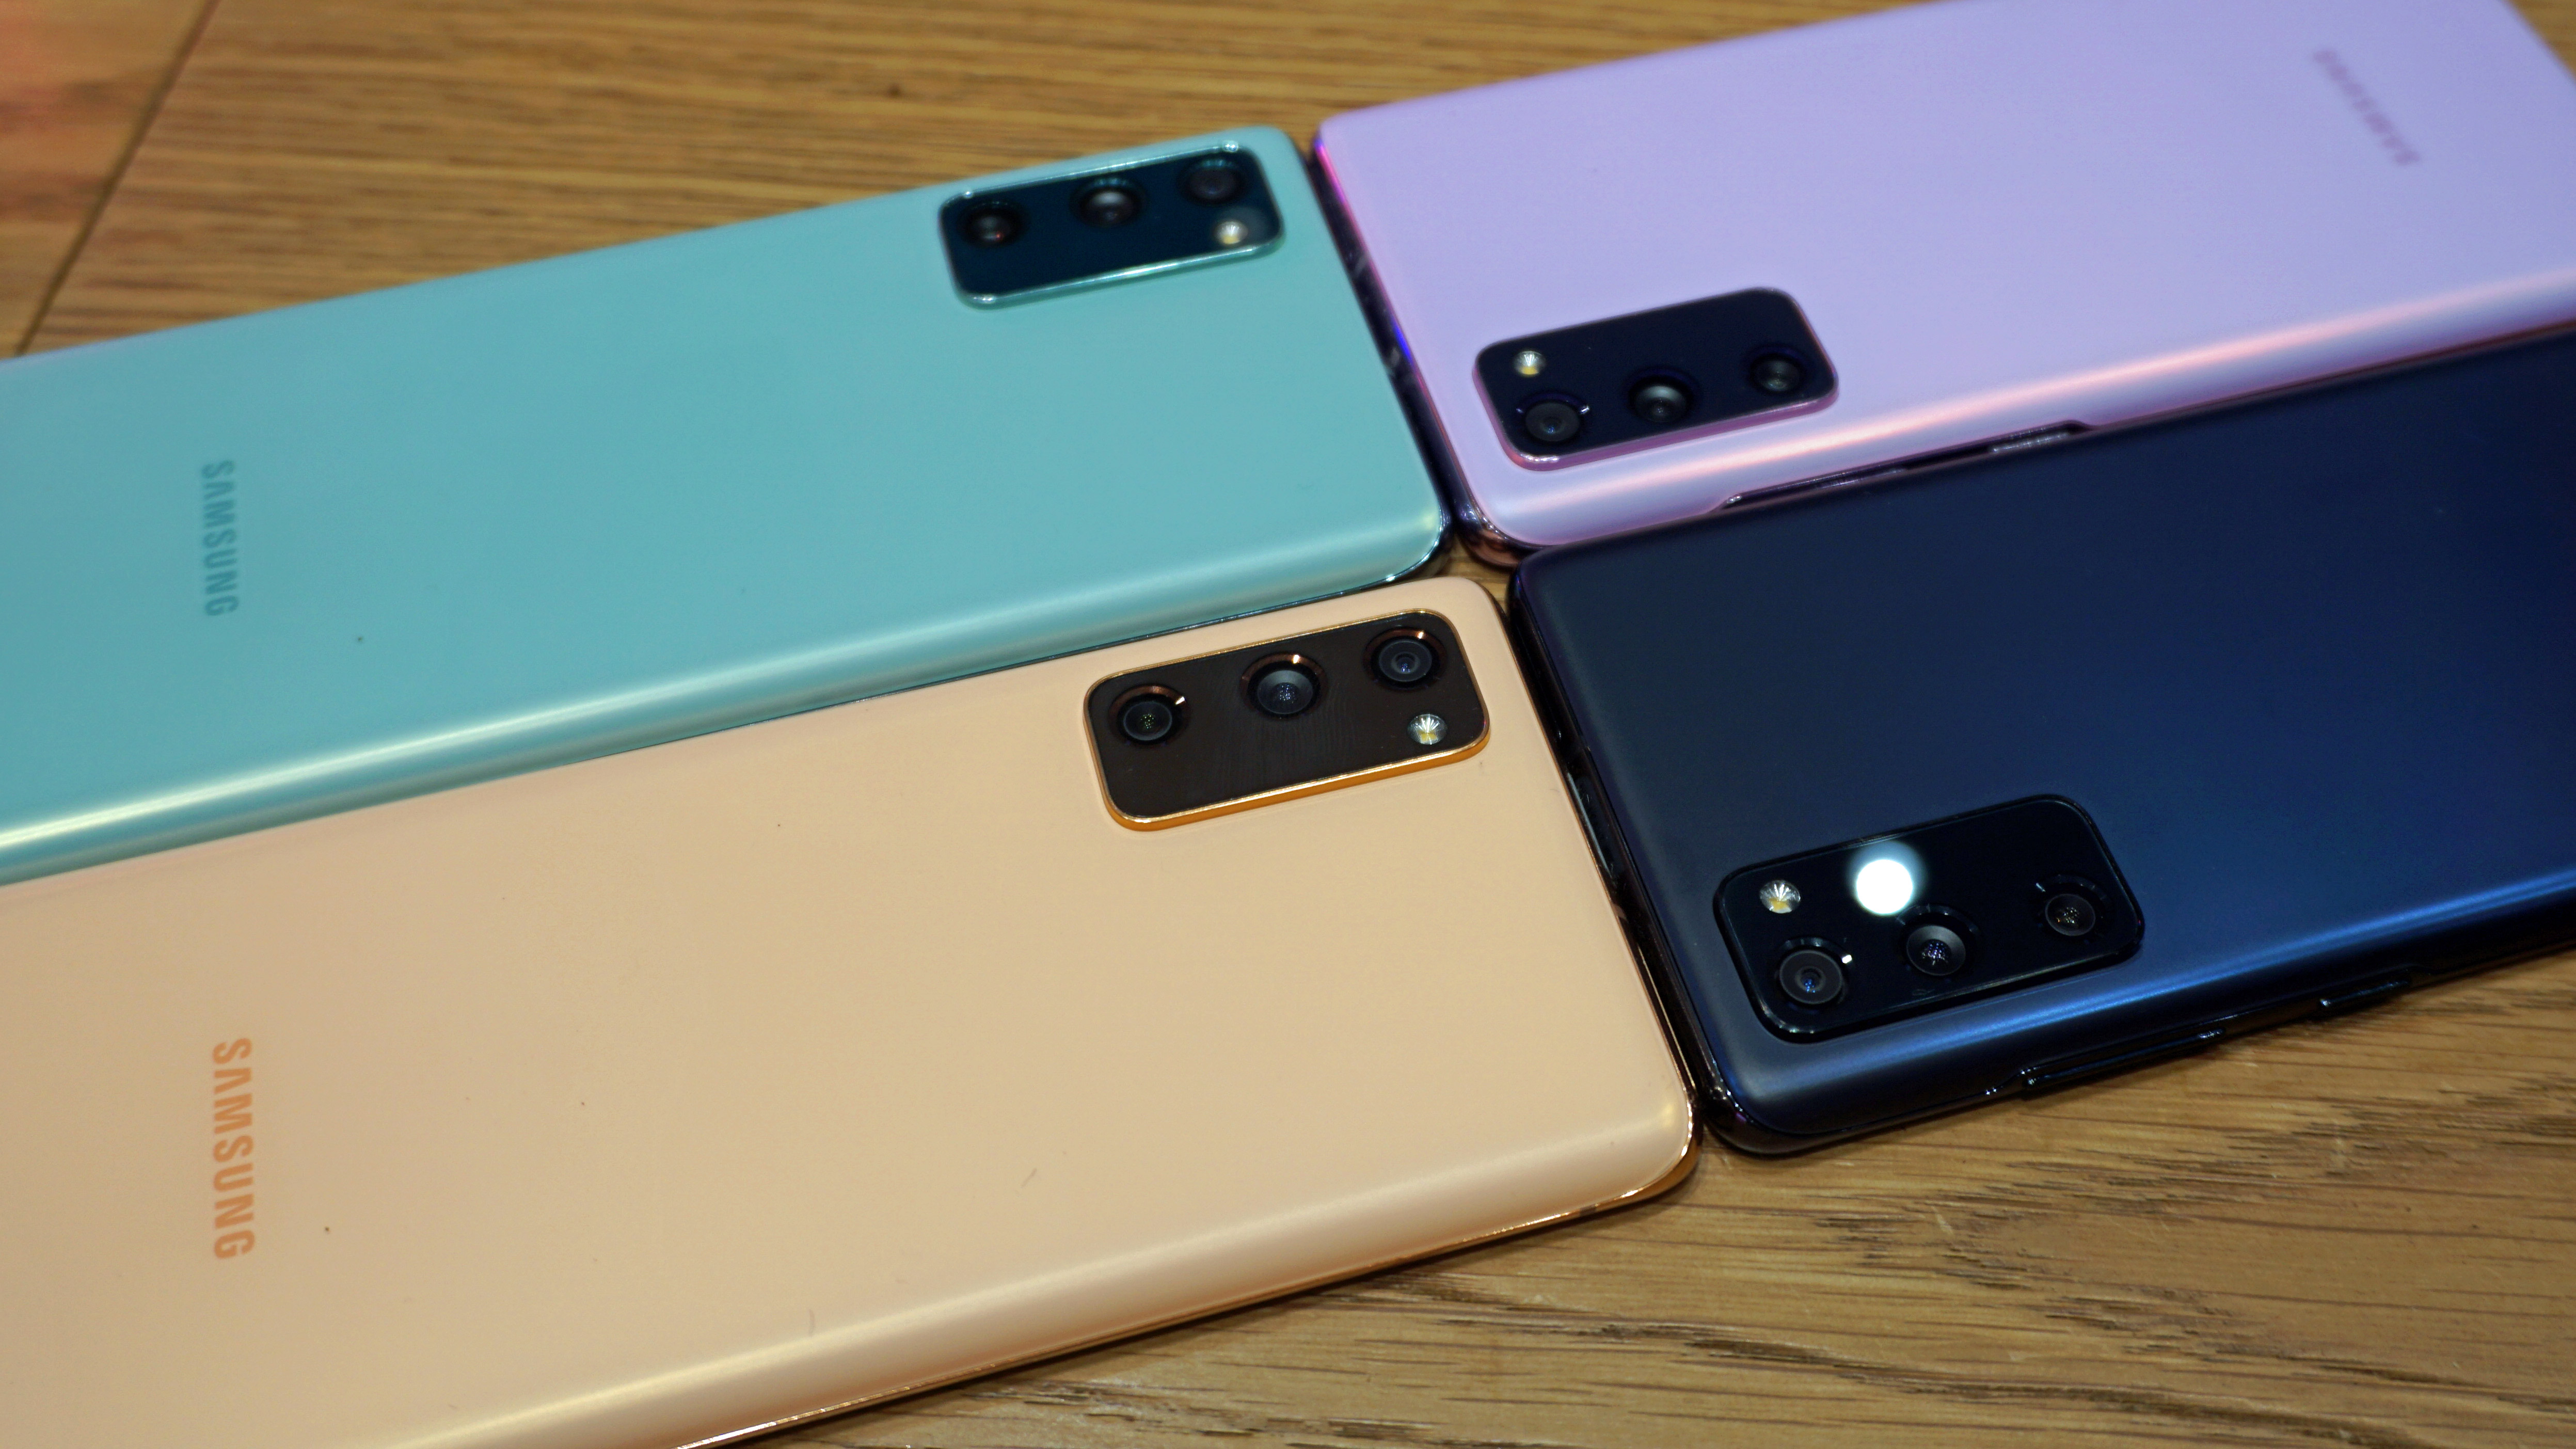 Four color versions of the Samsung Galaxy S20 Fan Edition